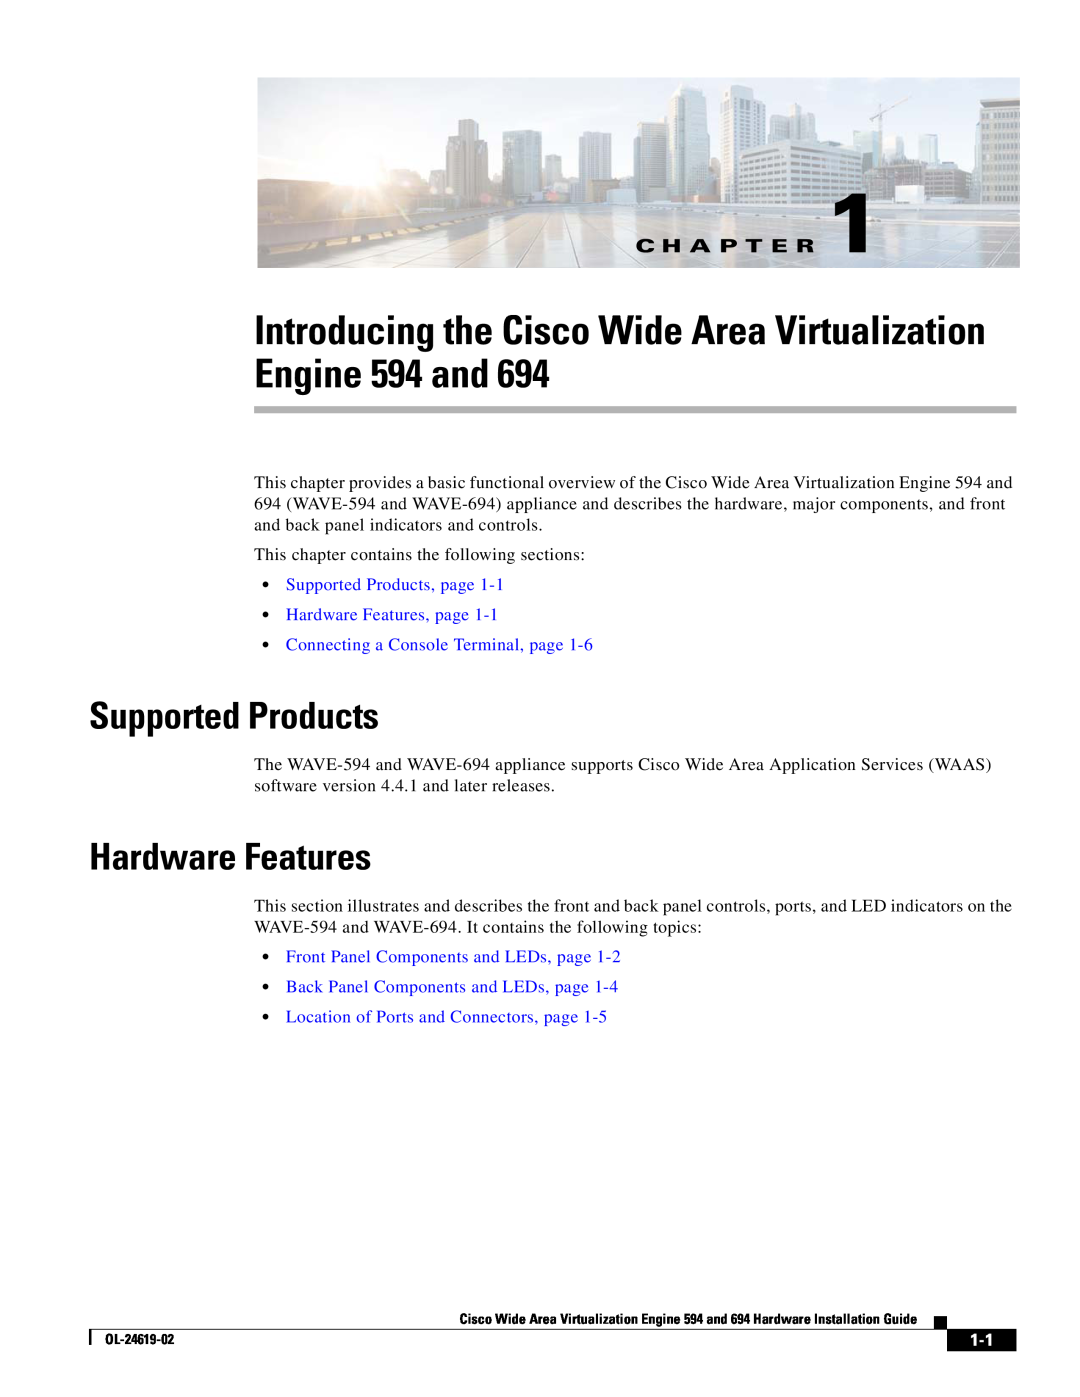 Cisco Systems 694 Introducing the Cisco Wide Area Virtualization Engine 594 and, Supported Products, Hardware Features 